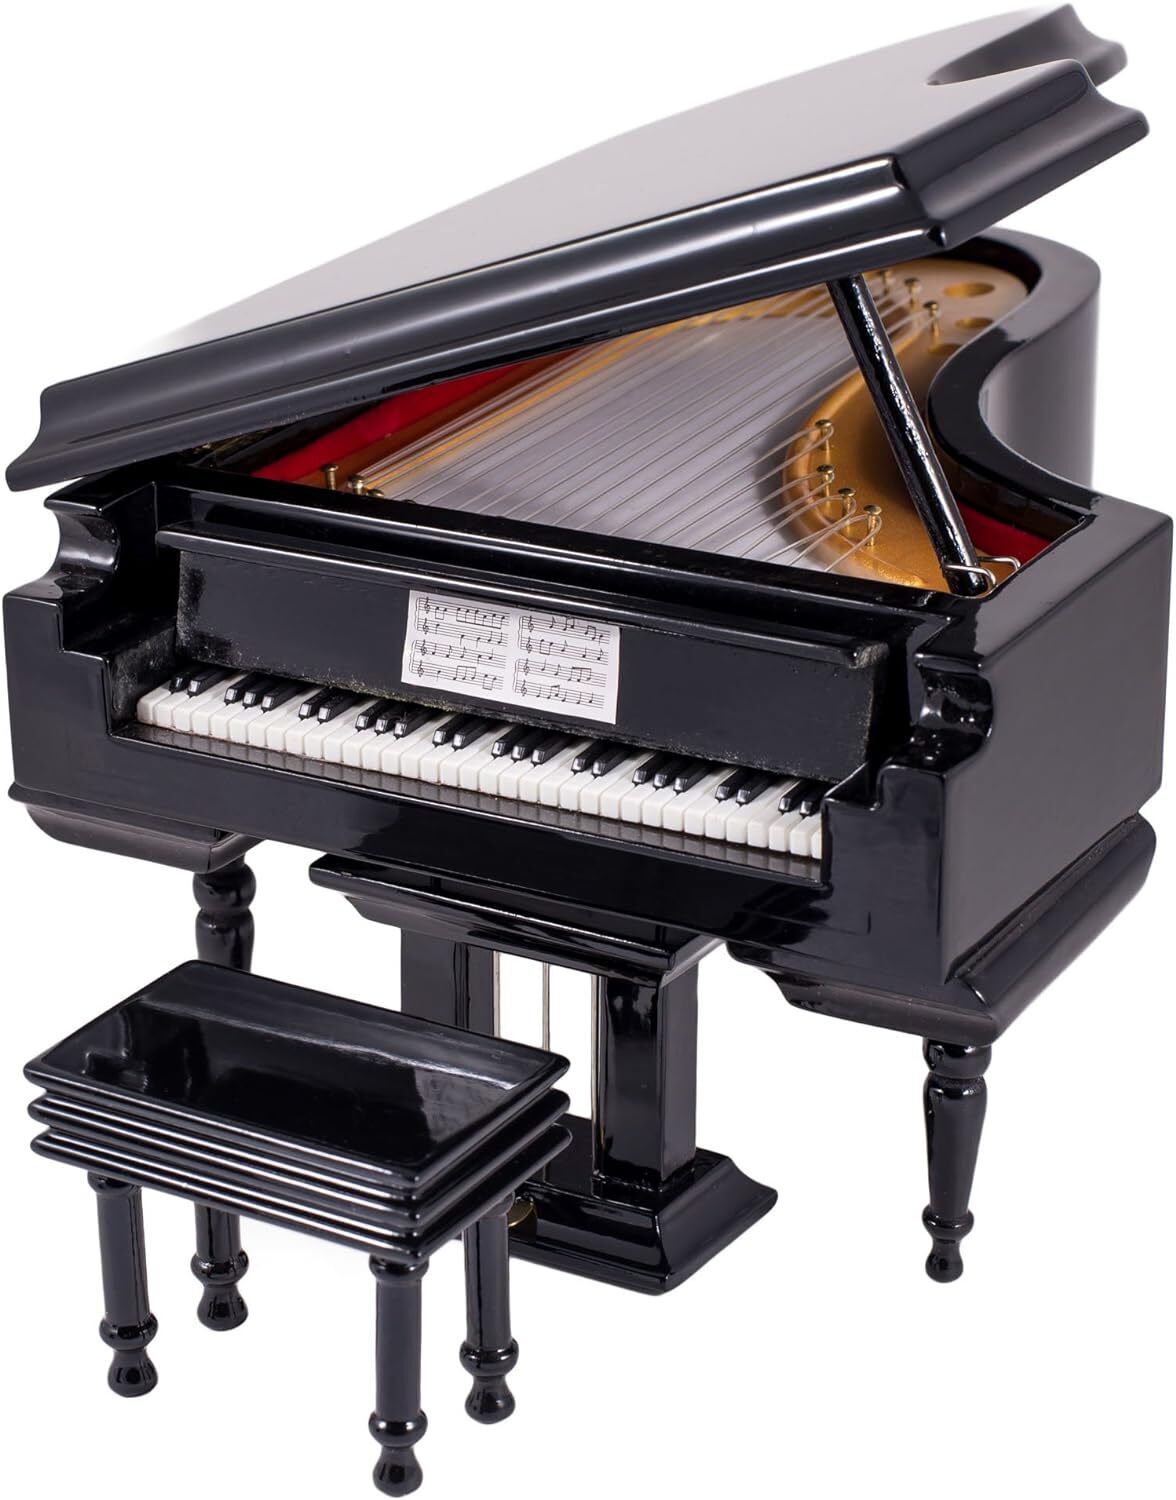 Black Baby Grand Piano Music Box with Bench and Black Case - Plays Fur Elise